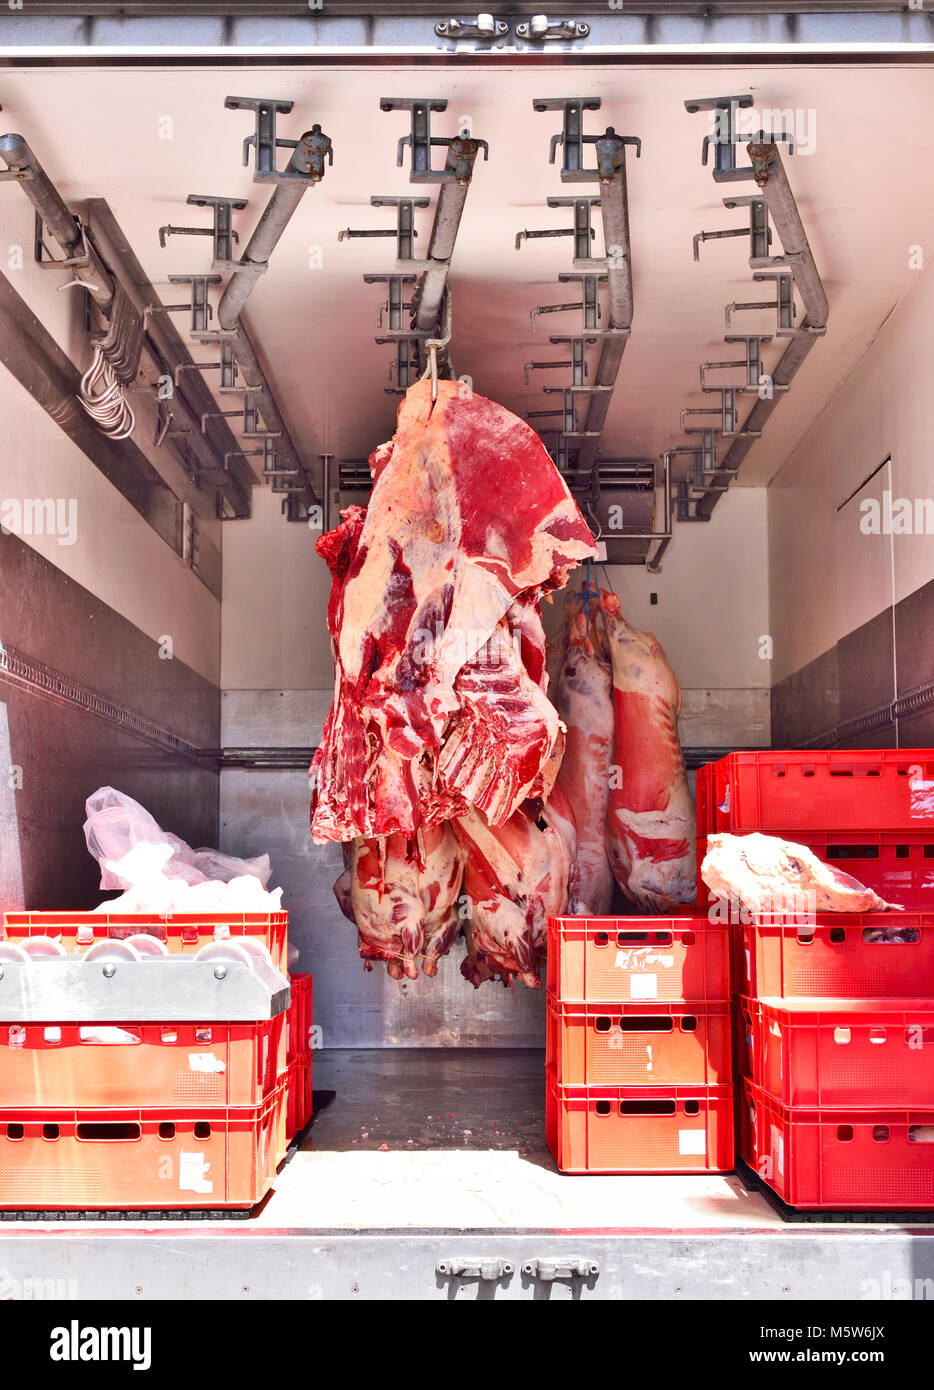 Food delivery of raw beef or pork, half beef in a cooling truck. Fresh red meat, buttery or slaughter house theme. Meat transporter, food industry. Stock Photo